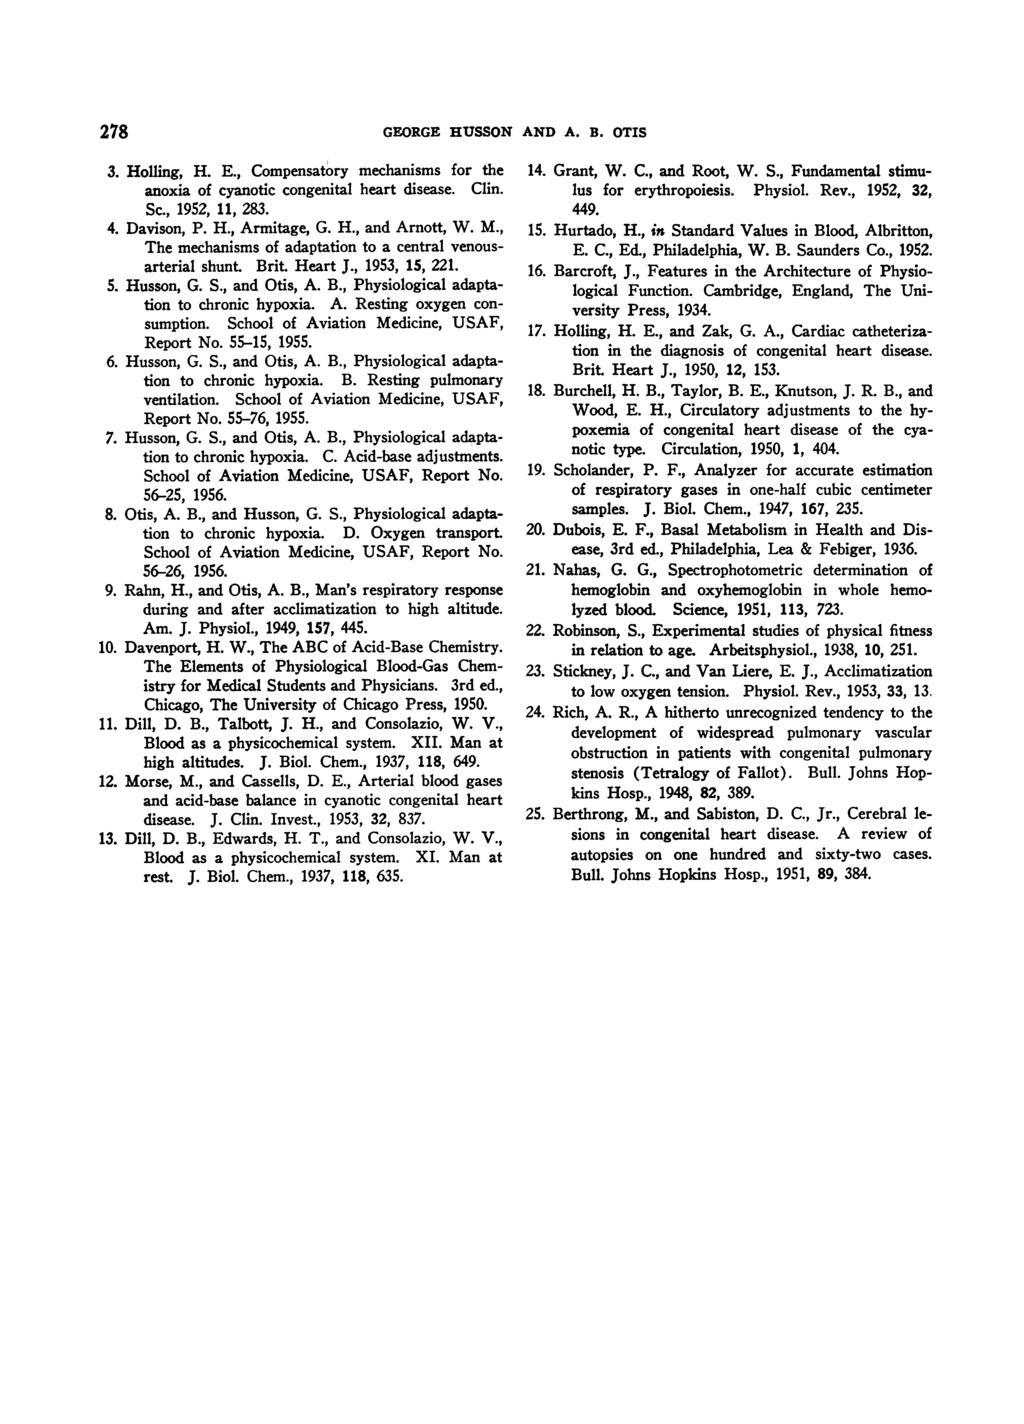 278 GEORGE HUSSON AND A. B. OTIS 3. Holling, H. E., Compensatory mechanisms for the anoxia of cyanotic congenital heart disease. Clin. Sc., 1952, 11, 283. 4. Davison, P. H., Armitage, G. H., and Arnott, W.